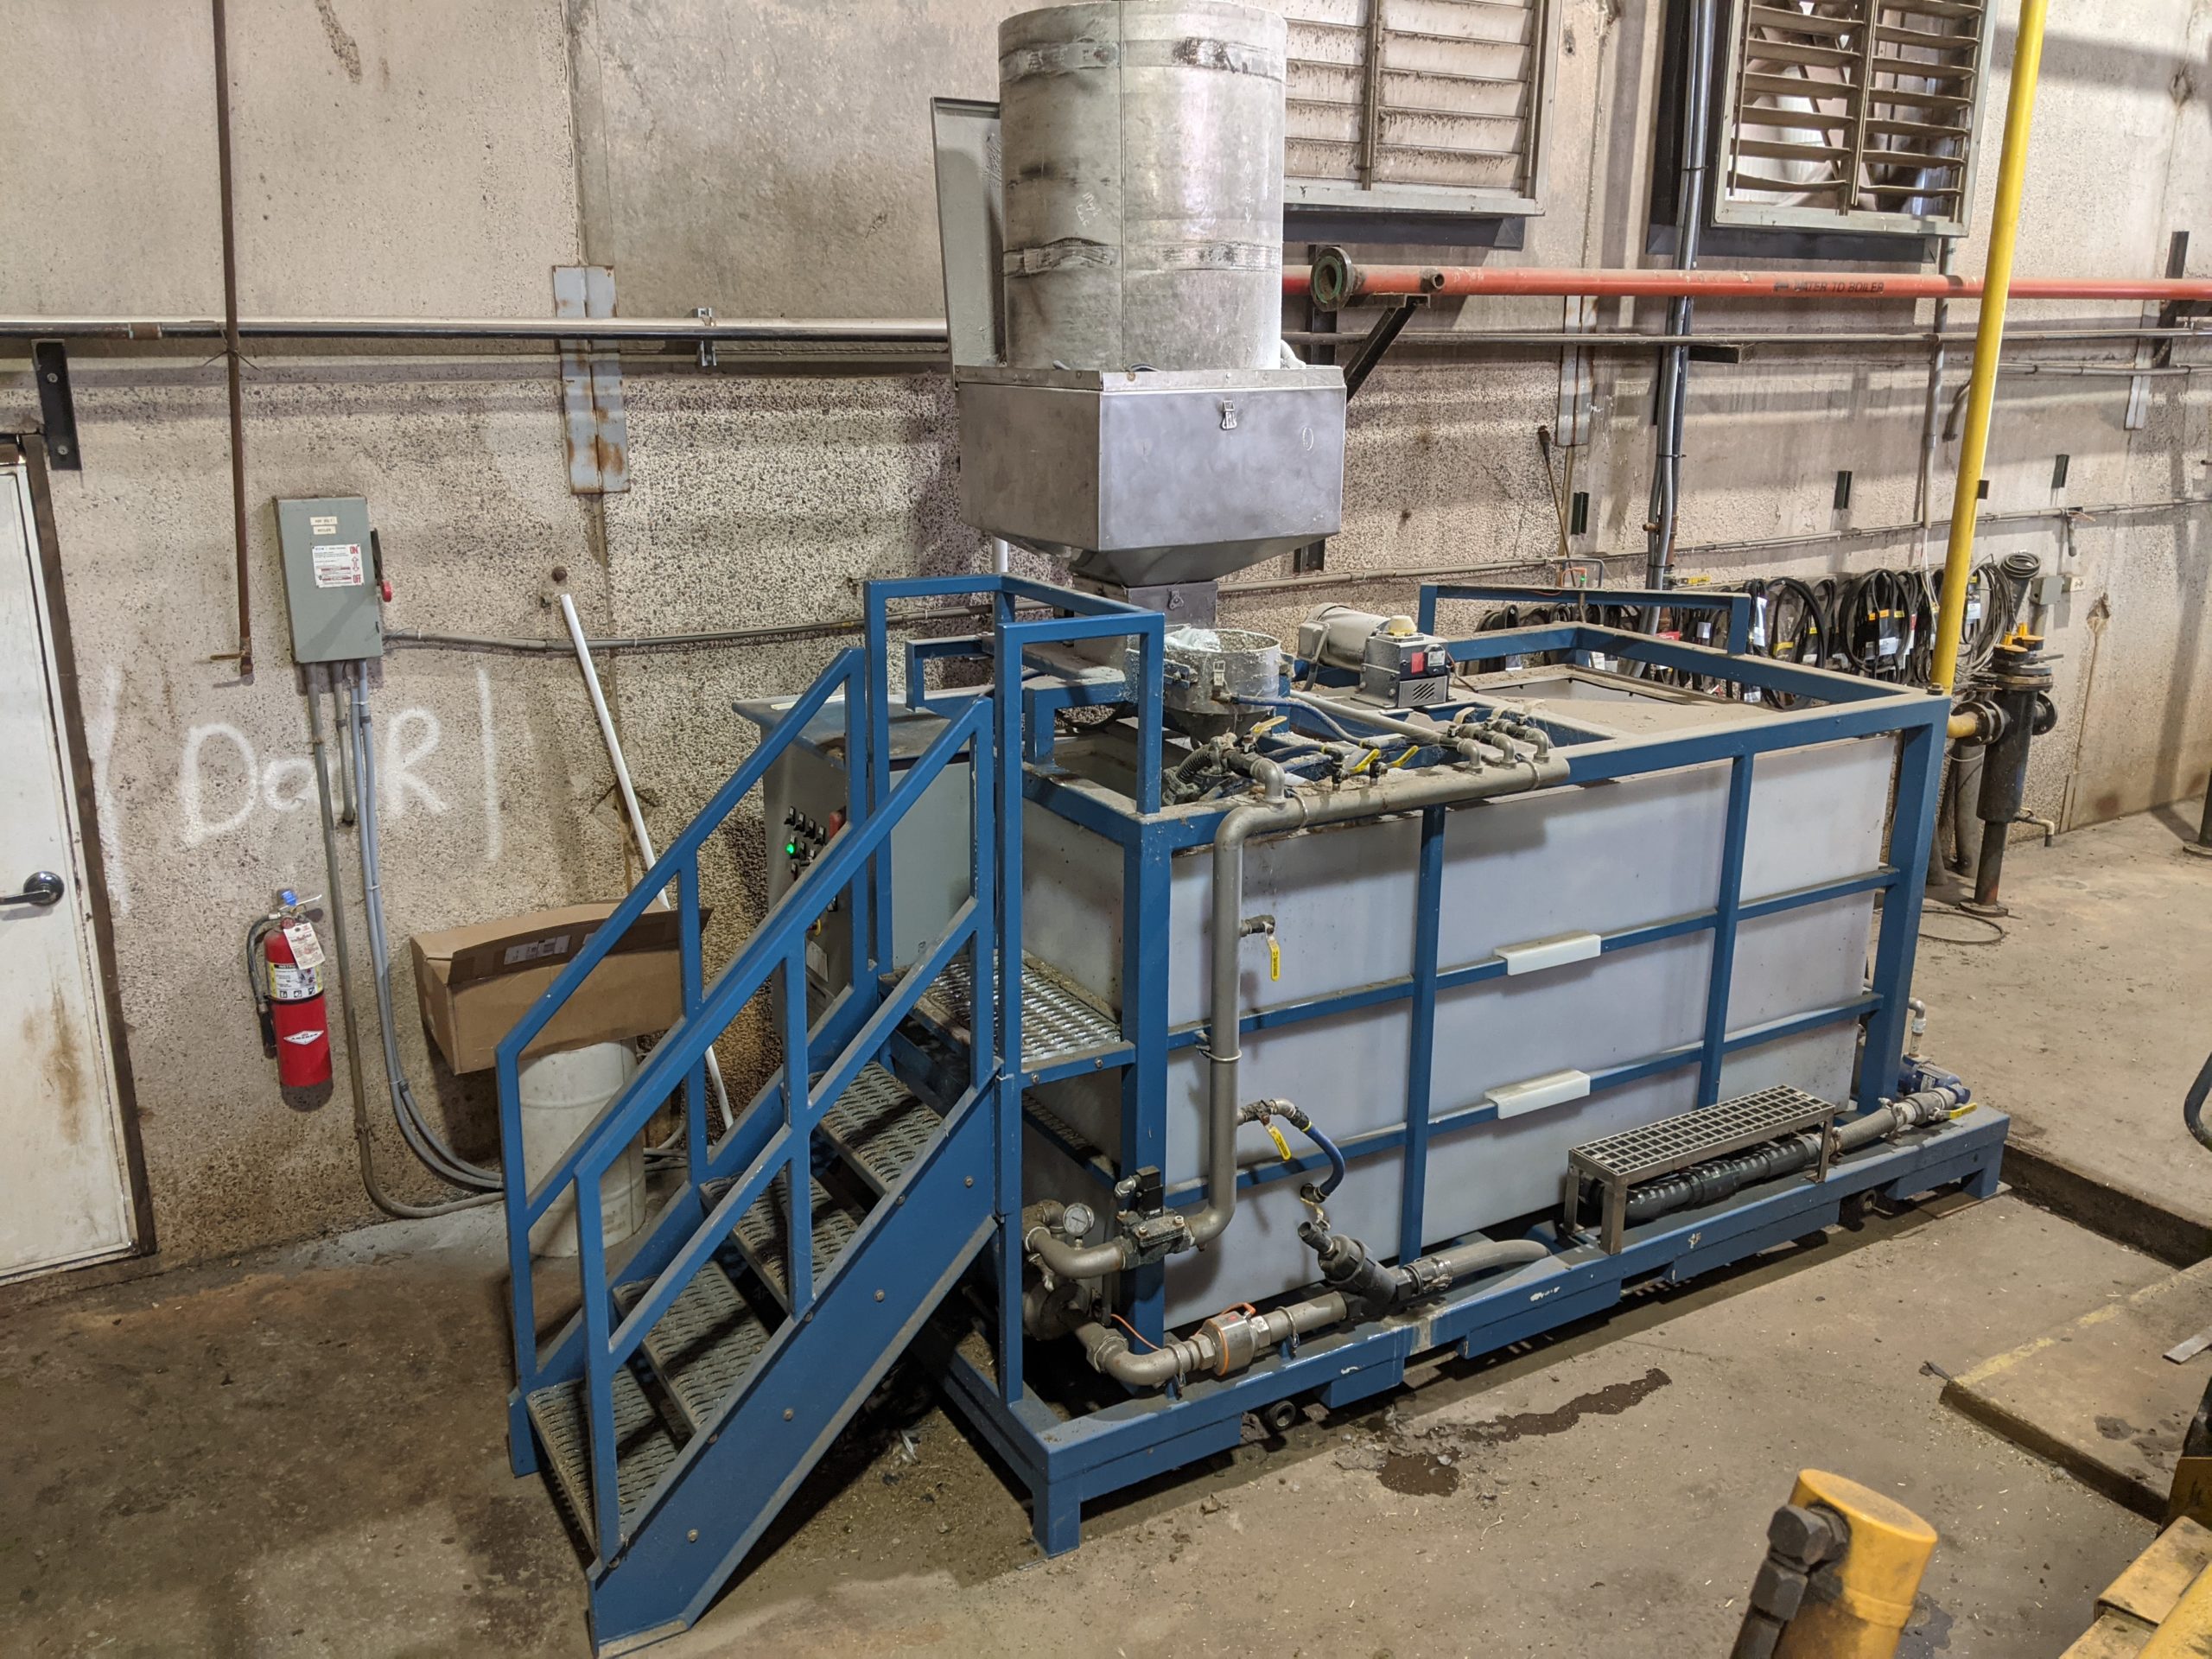 Clearwater Industries M500 dry polymer preparation unit in a dairy barn where it is used to aid in manure liquid-solid separation.